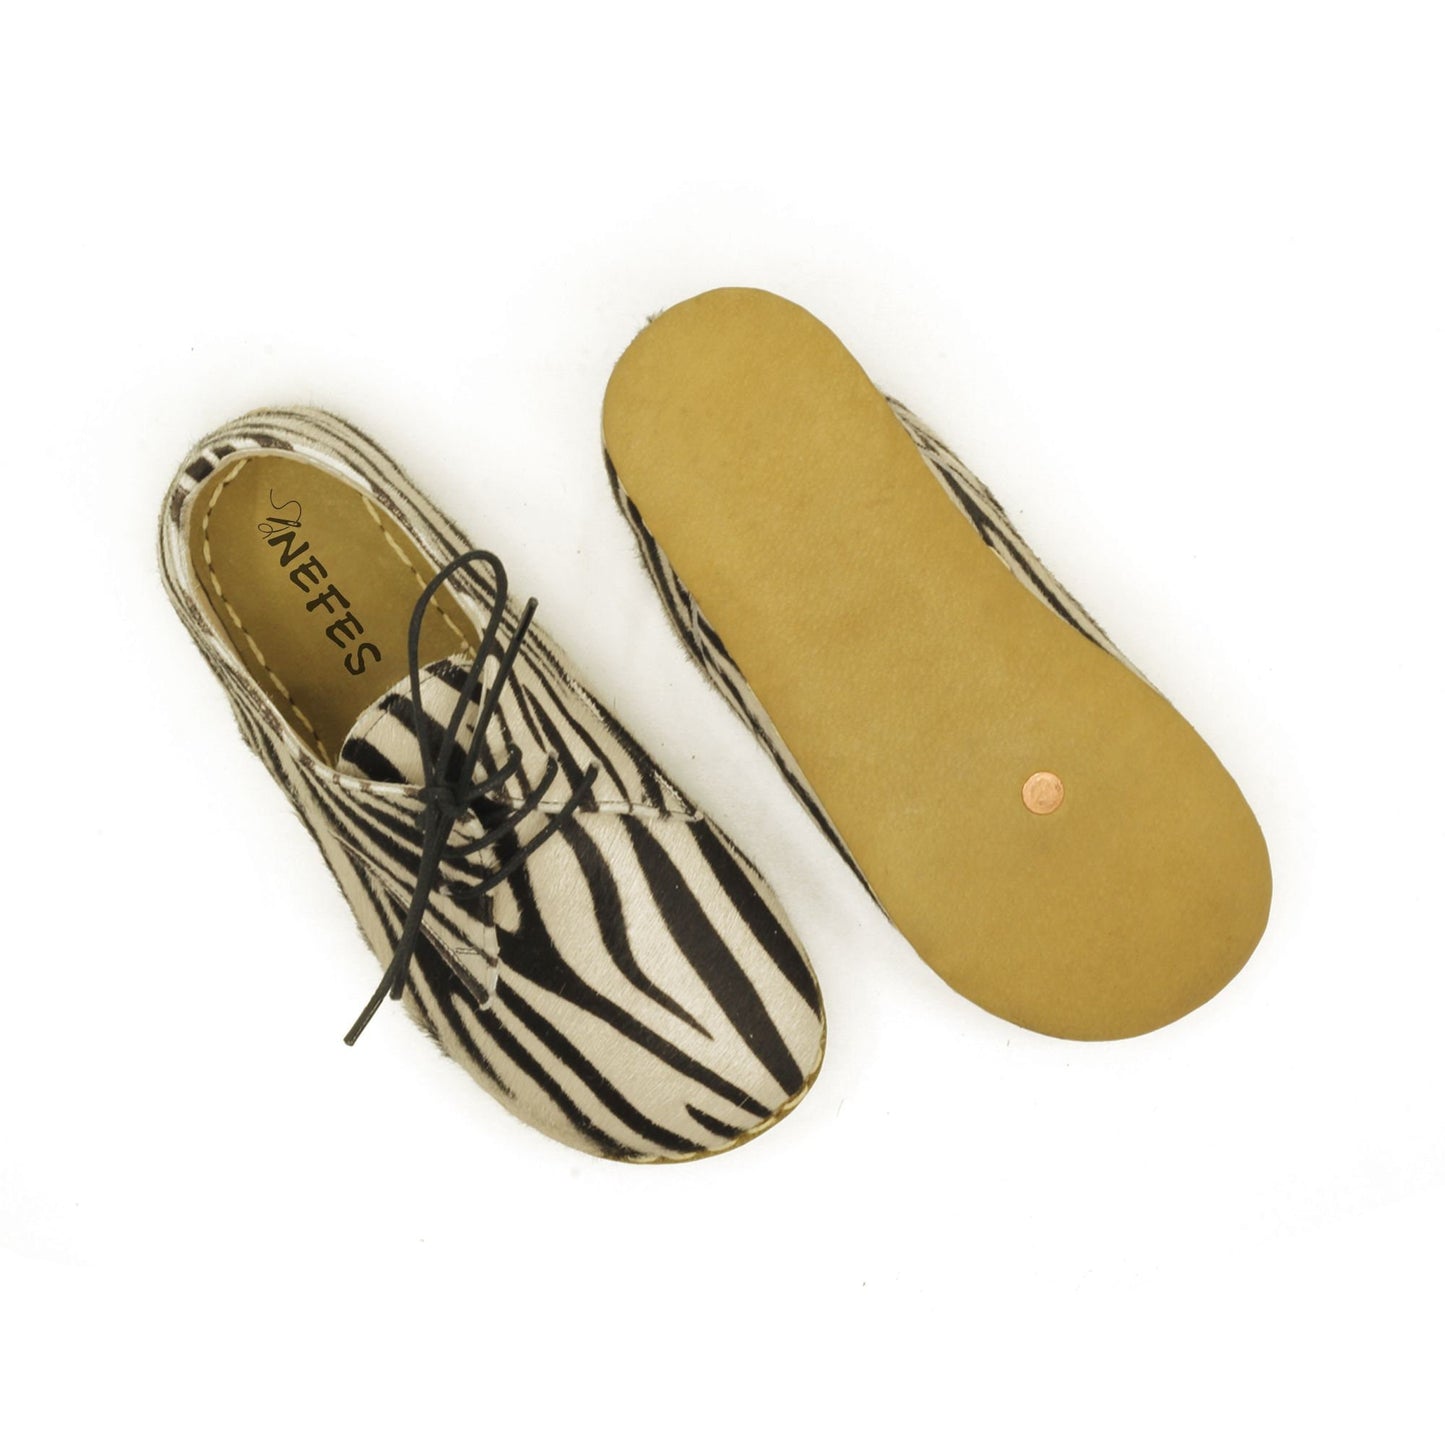 Women - Handmade - Oxford - Laced - Barefoot - Leather Shoes, - Zebra